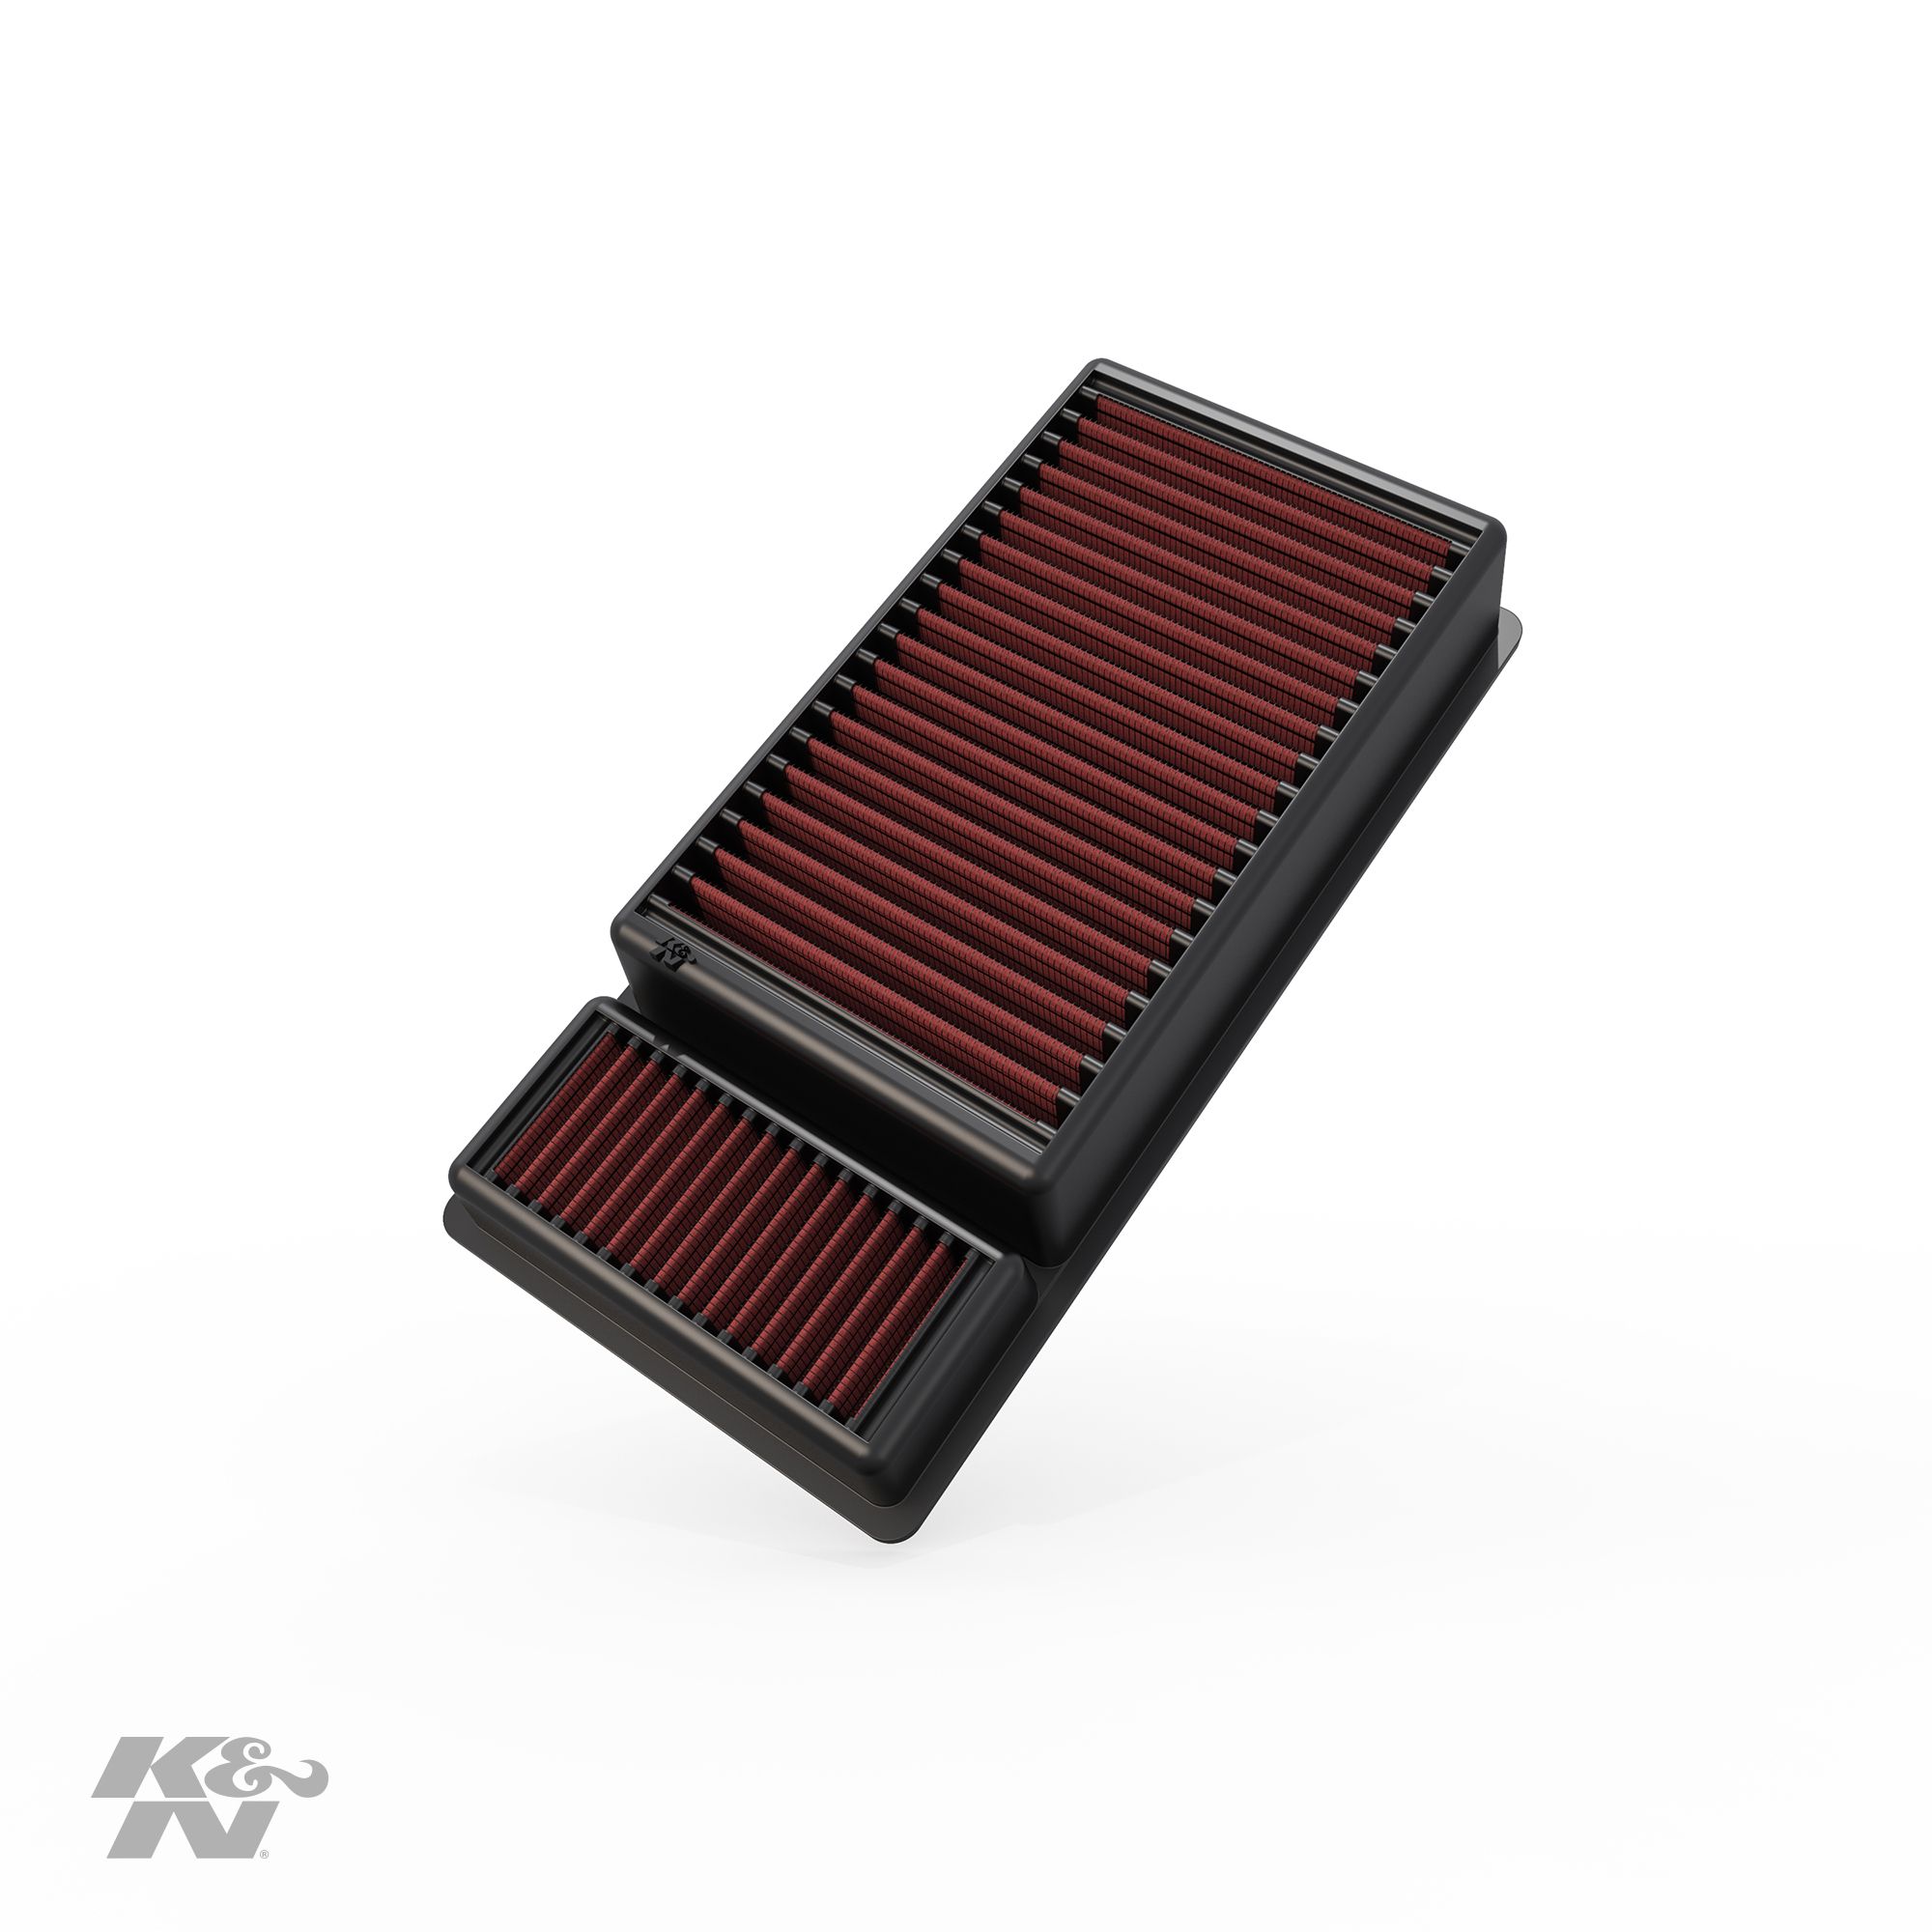 K&N Engine Air Filter: High Performance, Premium, Washable, Replacement Filter -$48.06(45% Off)